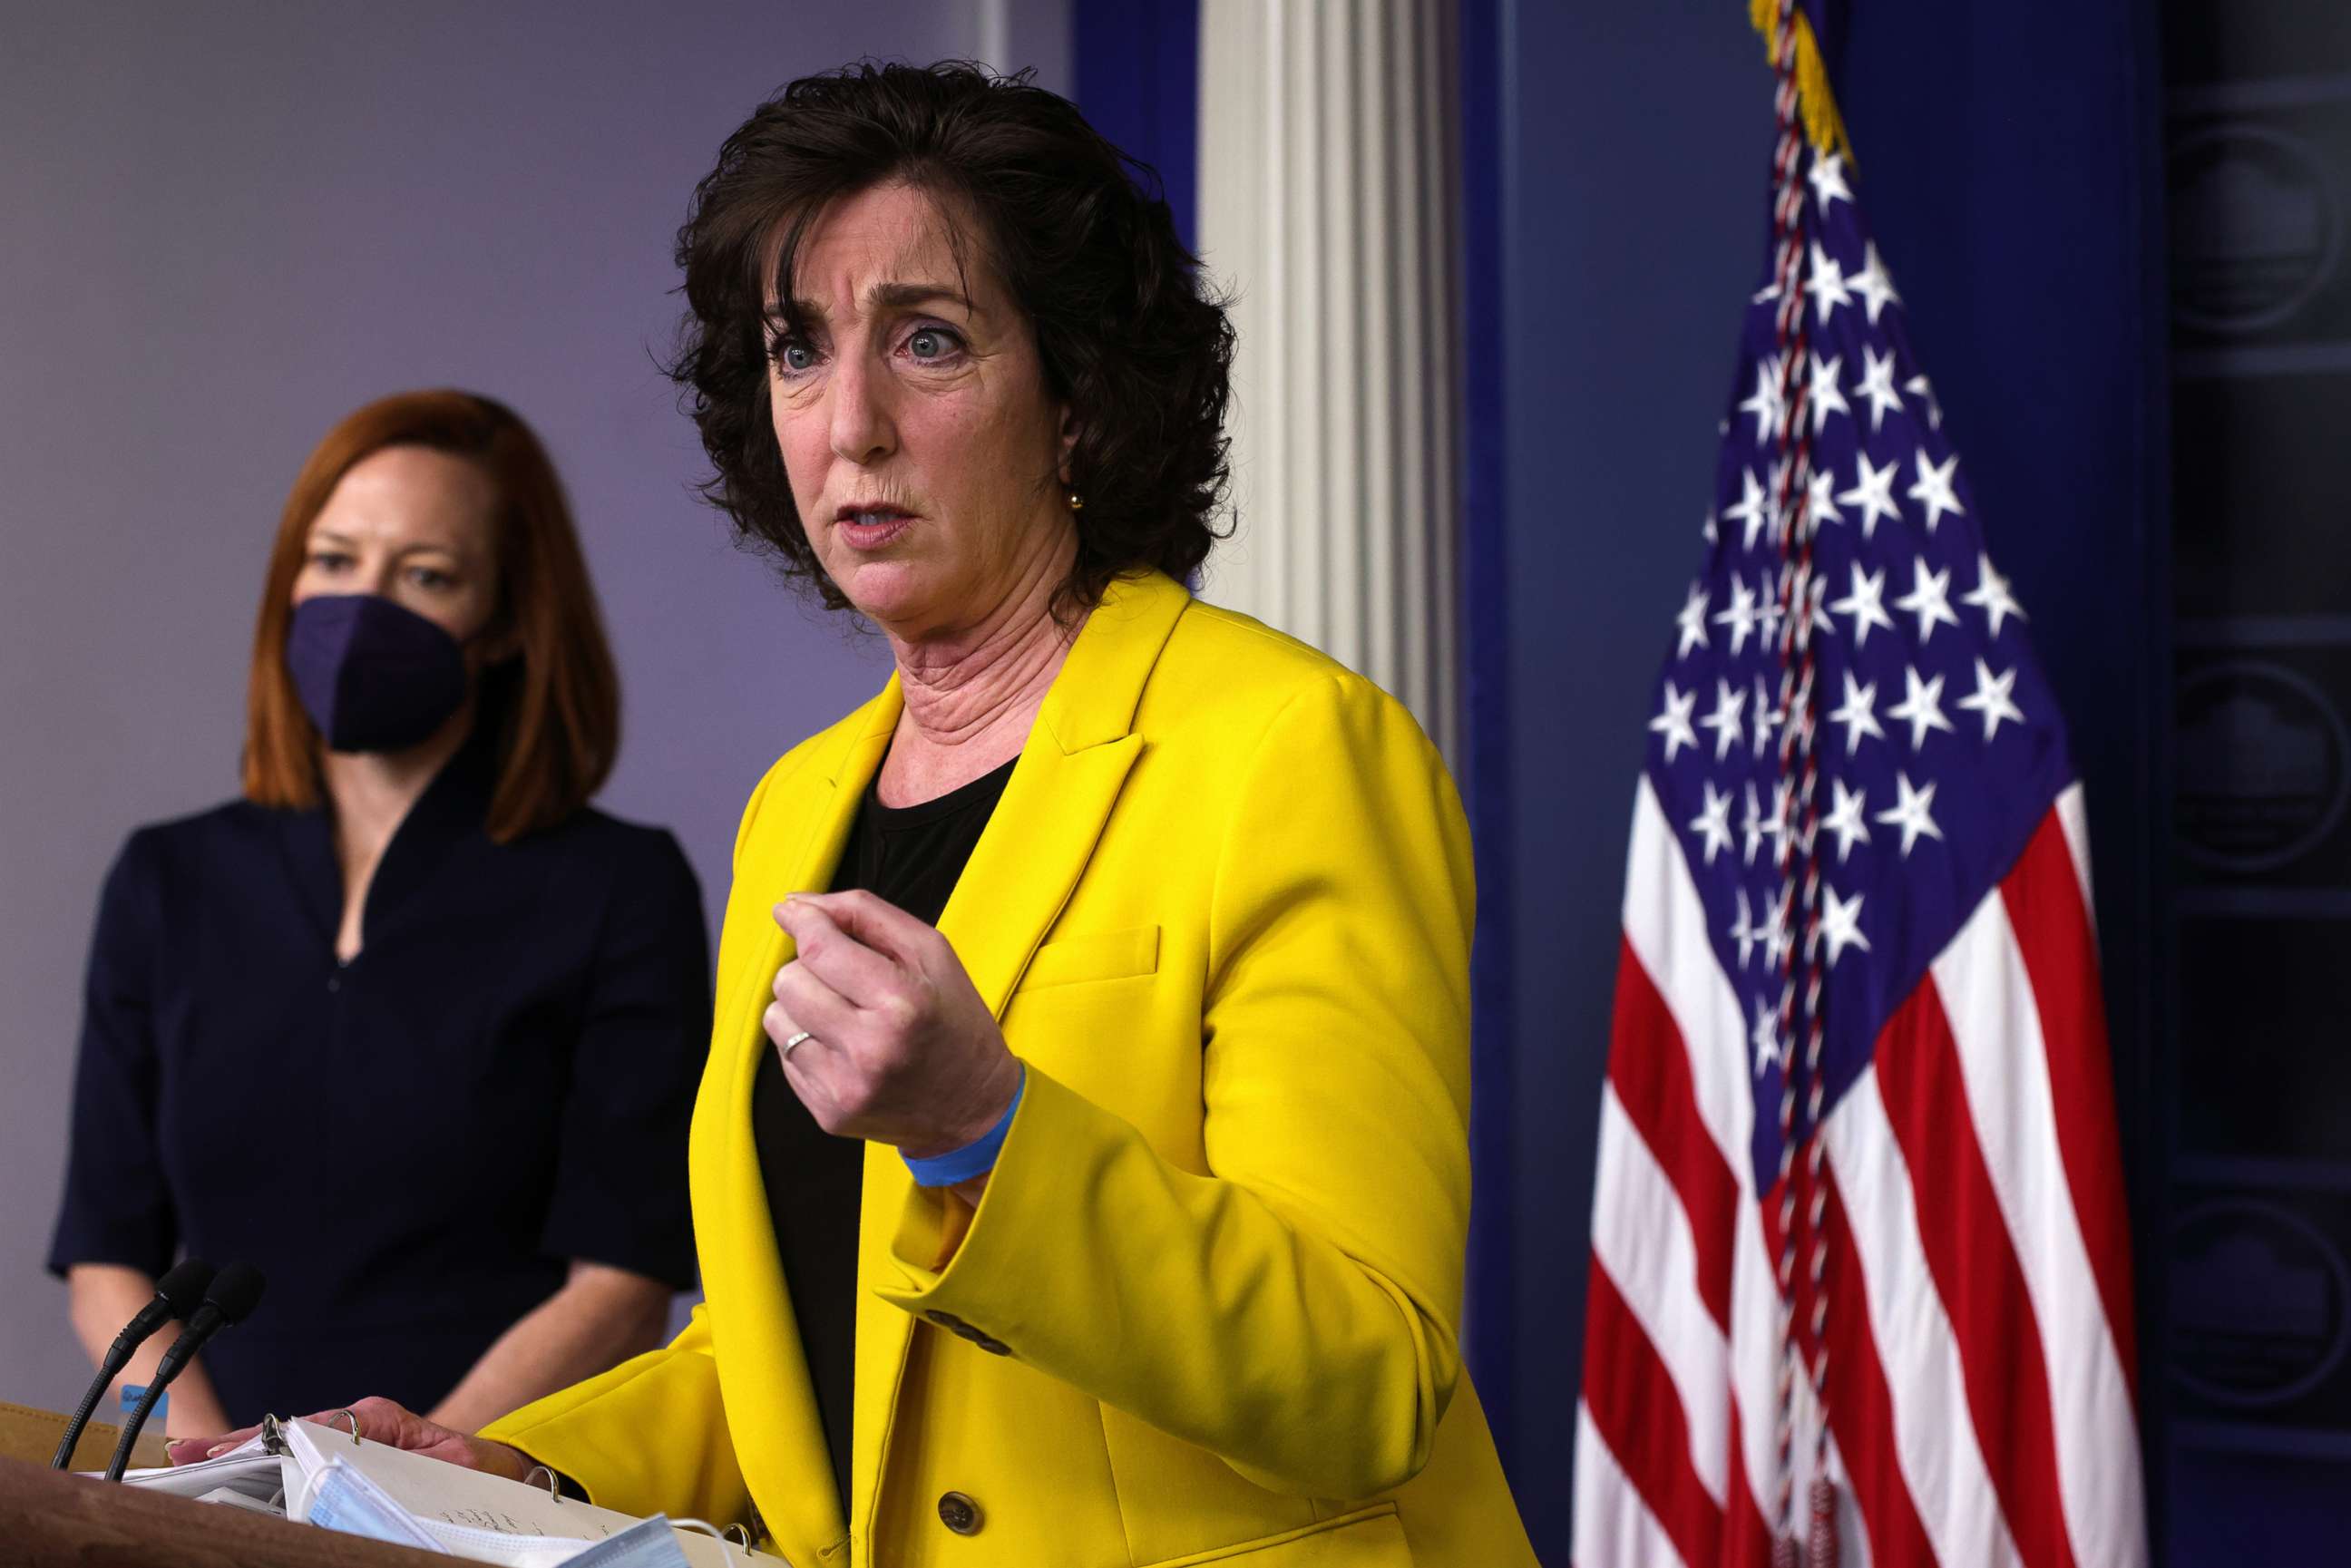 PHOTO: Special Assistant to the President & Coordinator for the Southern Border Ambassador Roberta Jacobson speaks as White House Press Secretary Jen Psaki listens during a daily press briefing at the White House, March 10, 2021, in Washington, D.C.